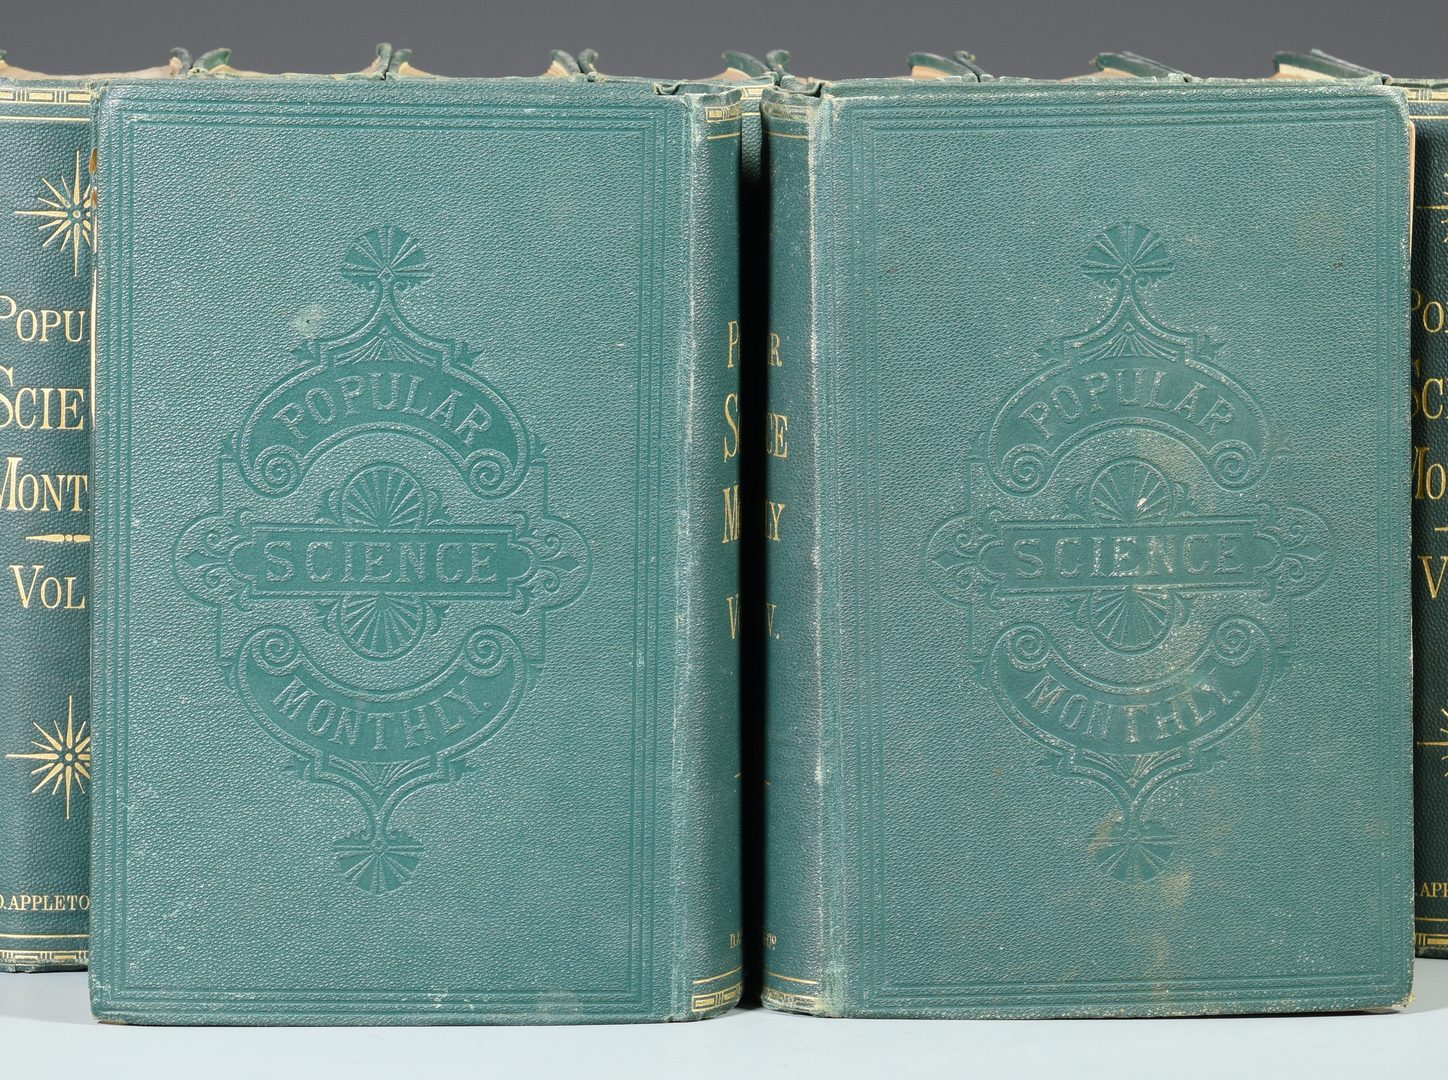 Lot 732: First Ed. Popular Science 1872-1879